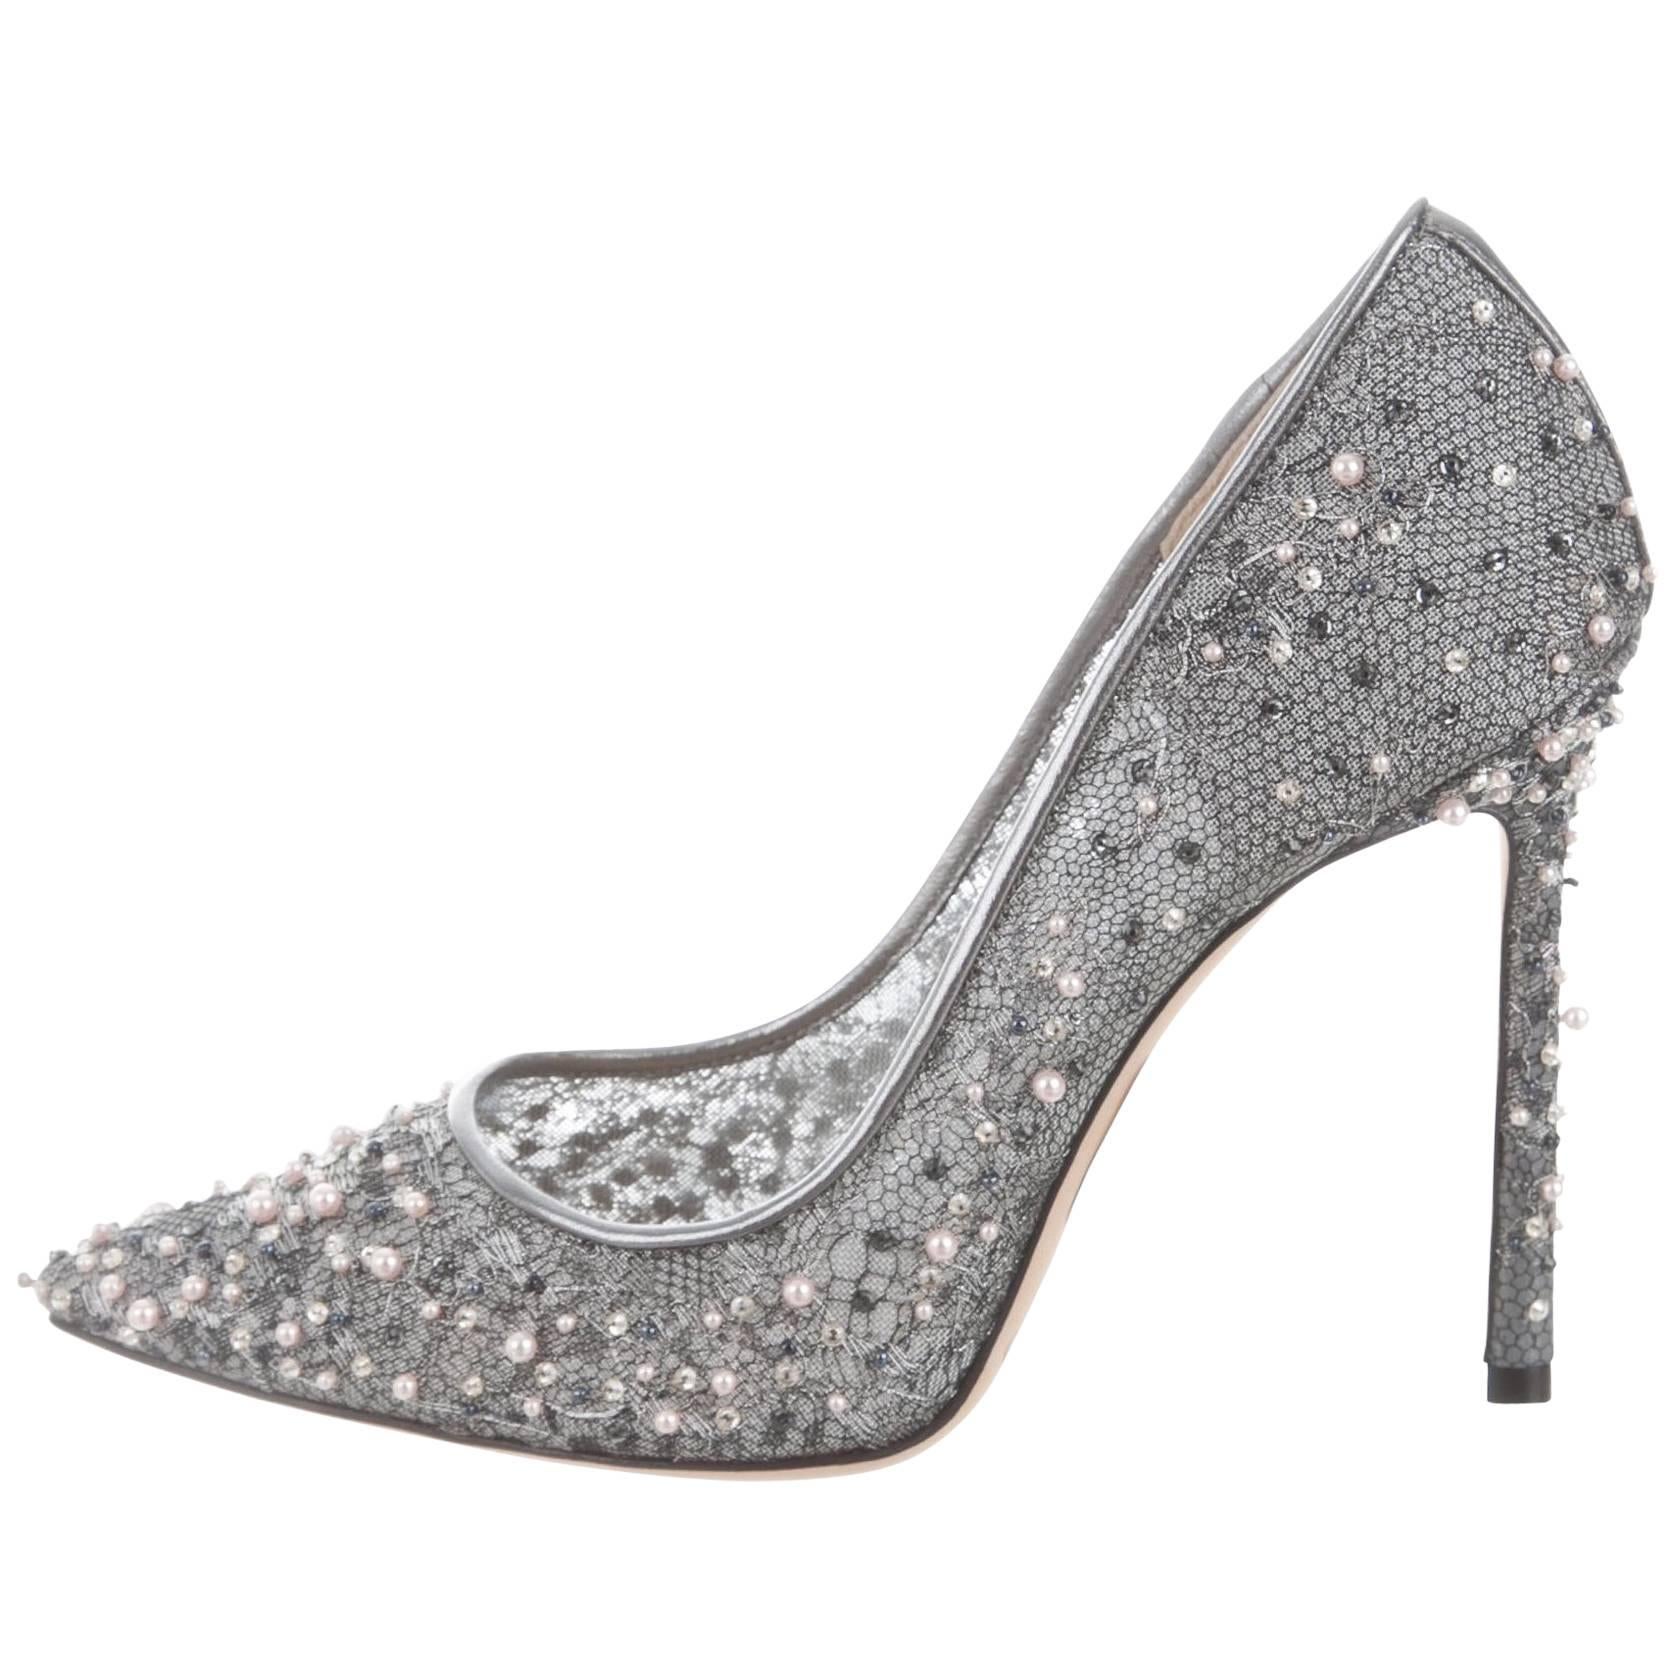 Jimmy Choo New Sold Out Silver Pearl High Heels Pumps in Box